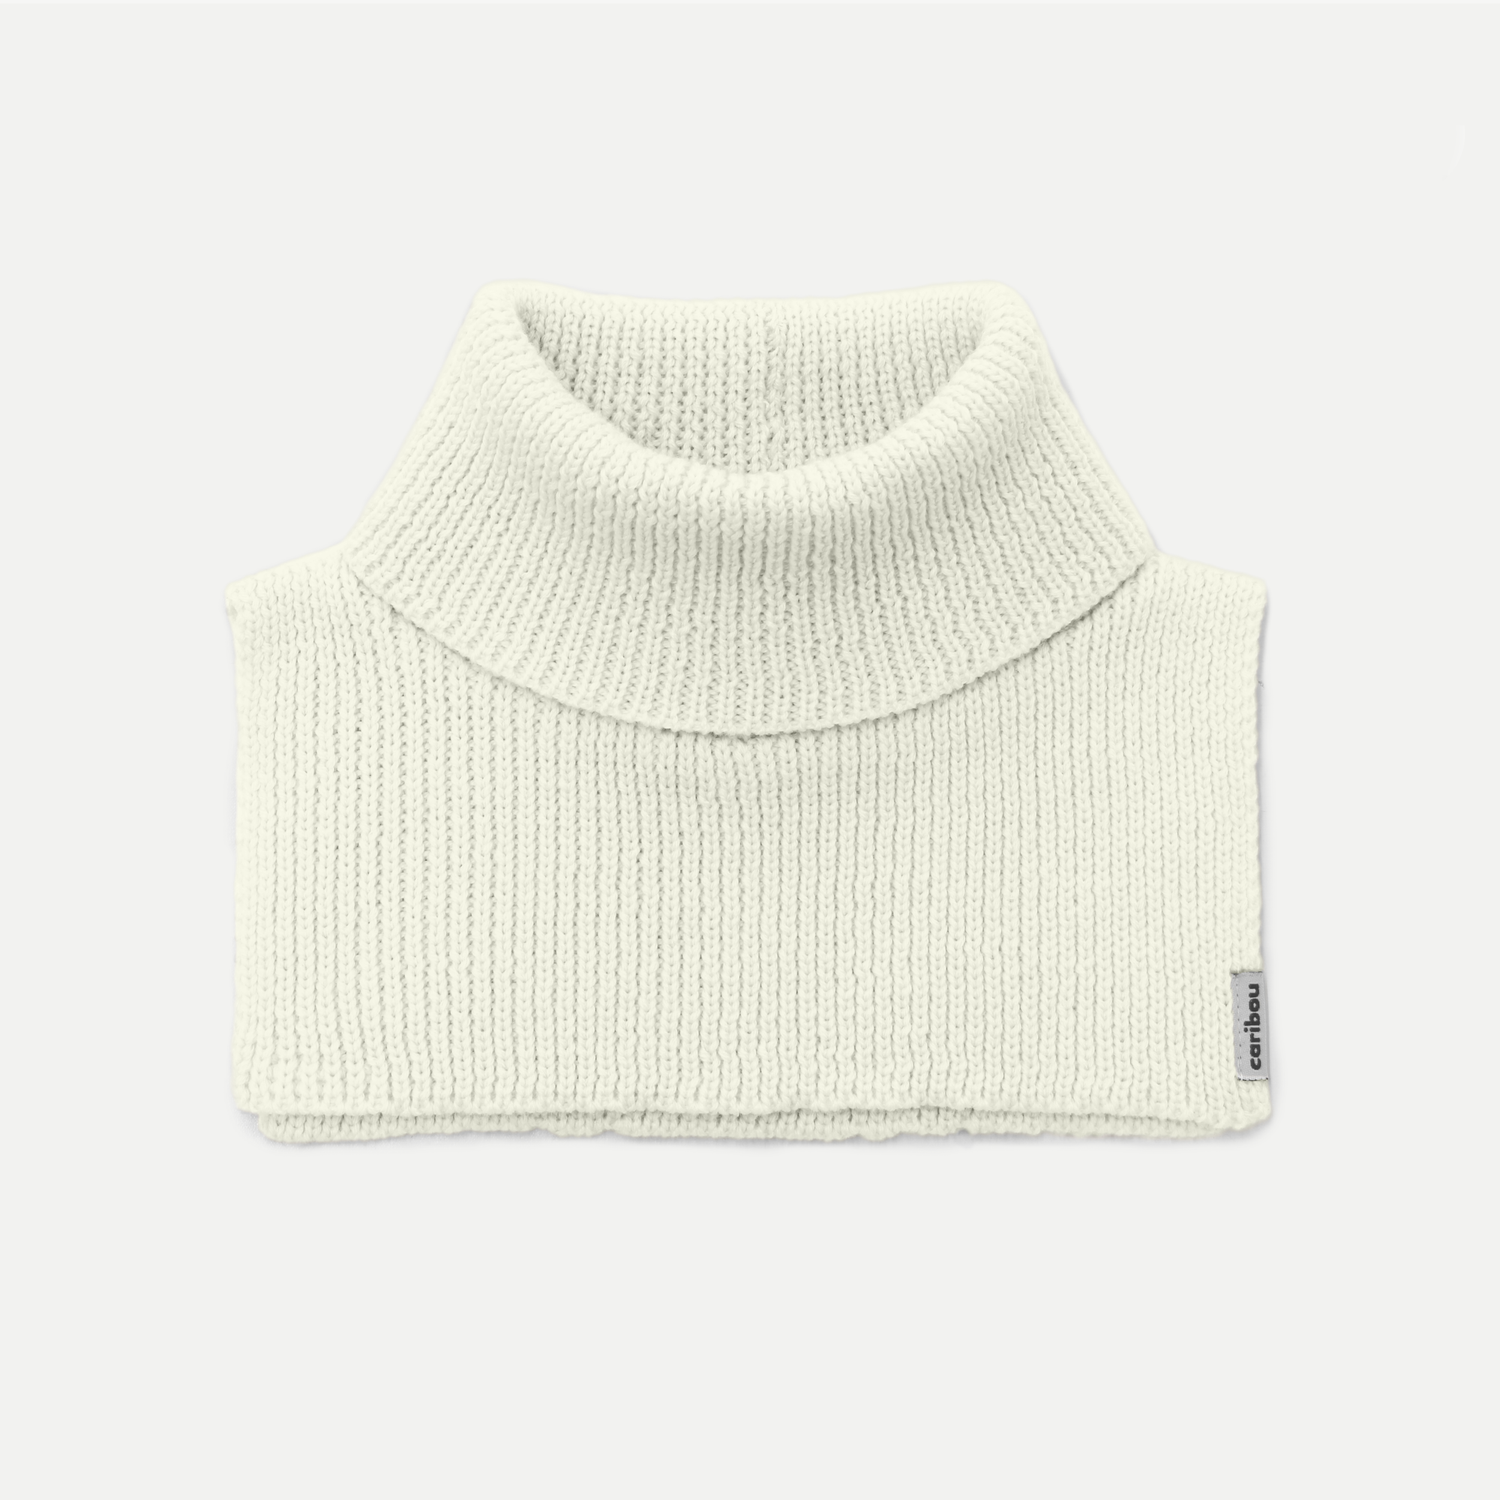 Neck warmer - 8 colors